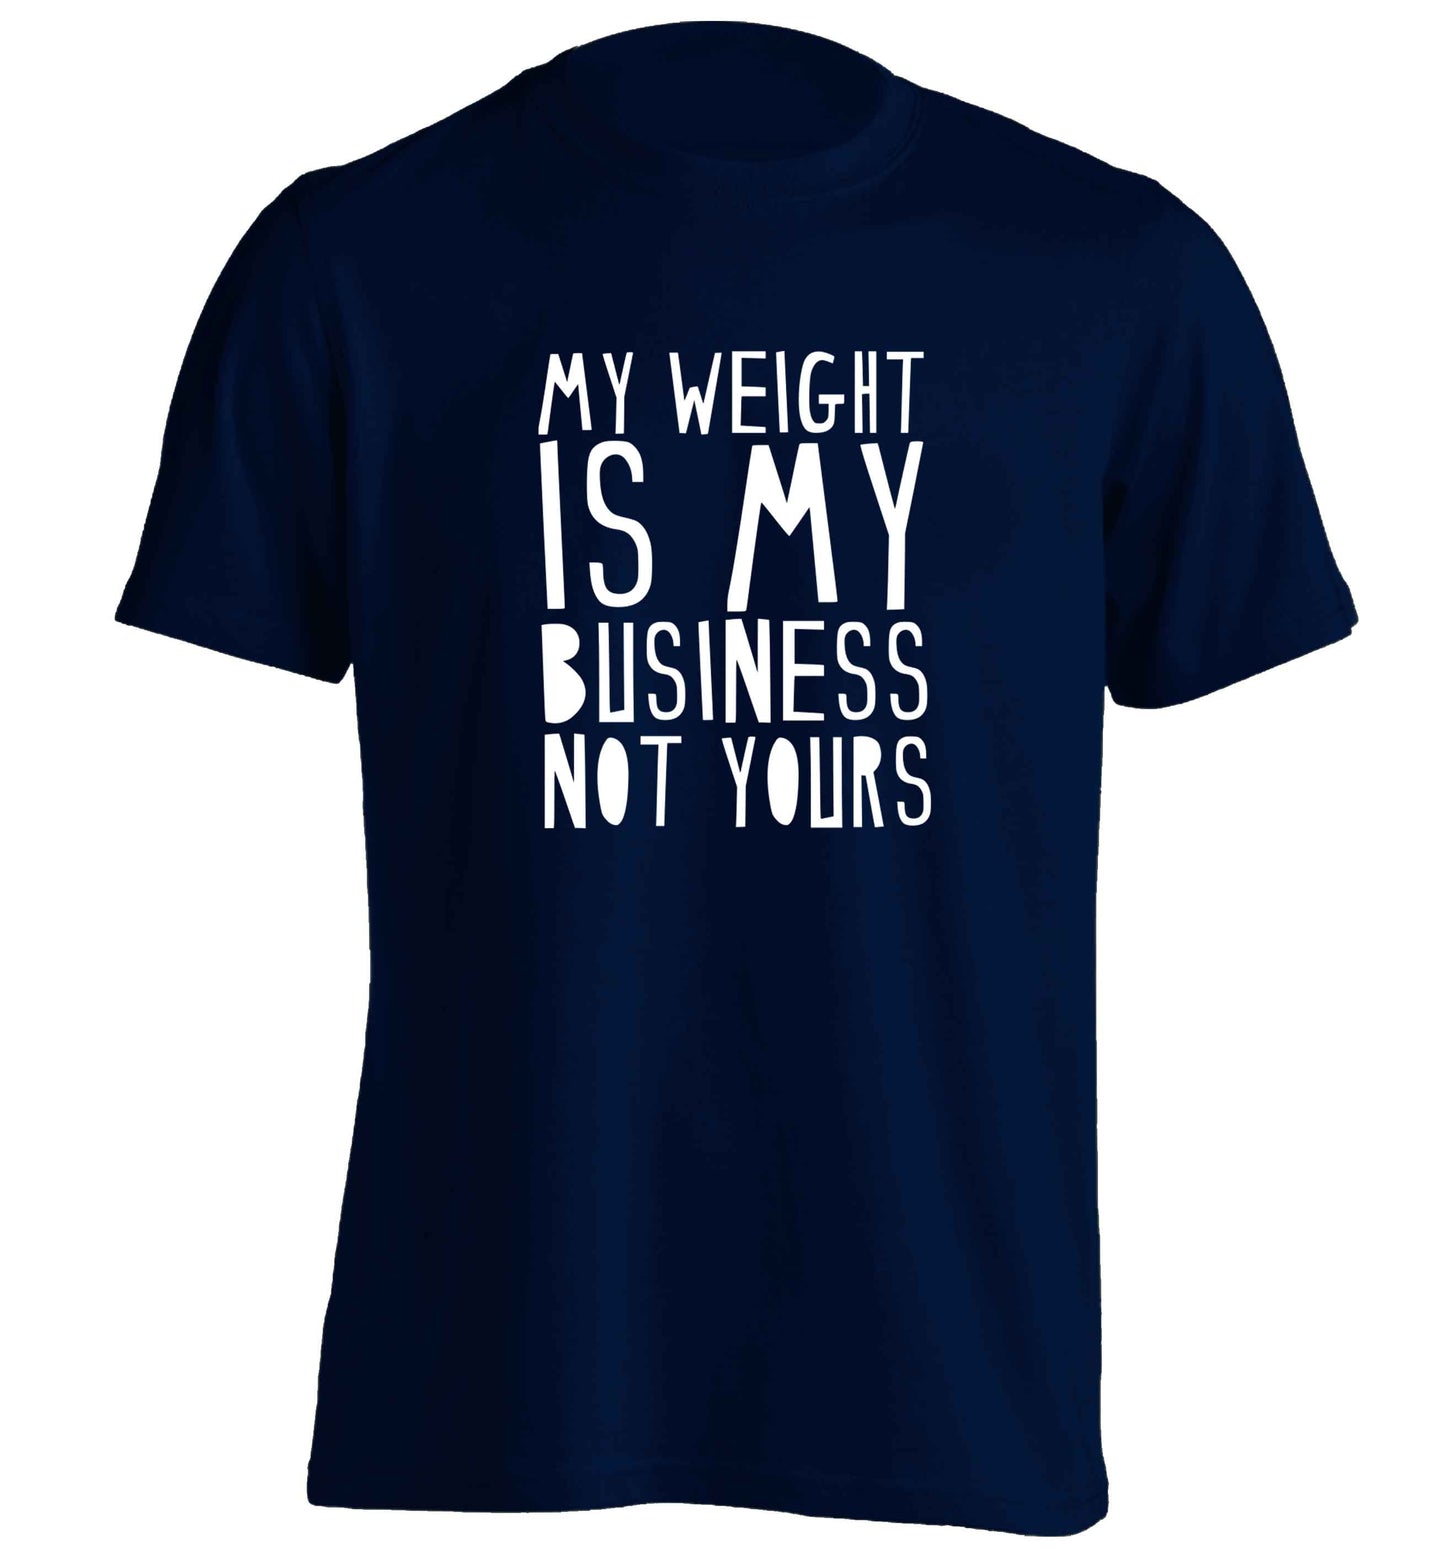 My weight is my business not yours adults unisex navy Tshirt 2XL